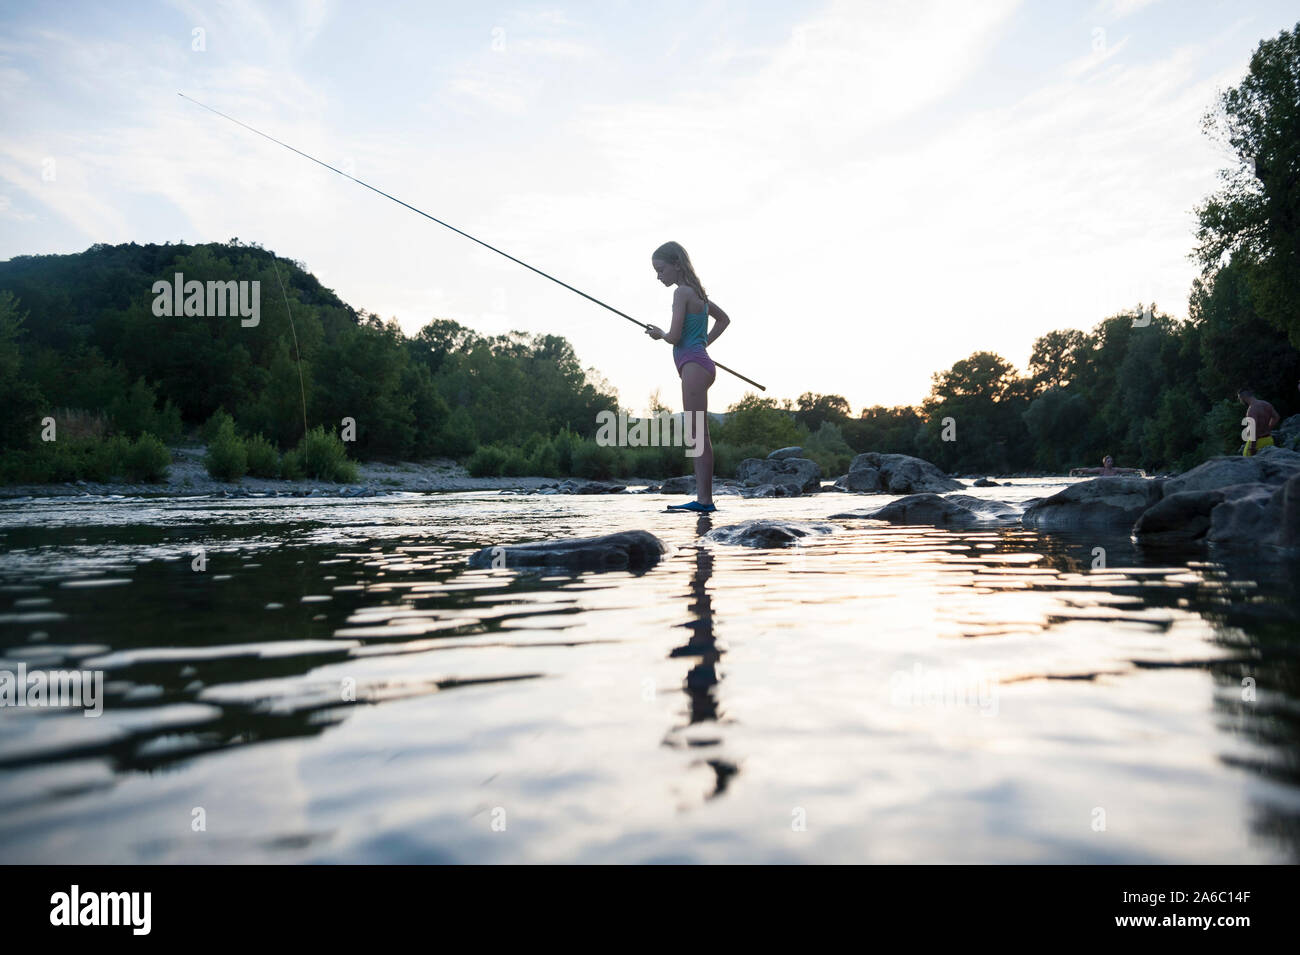 A kid starts ands at the waters edge at sunset fishing with a rod. Stock Photo